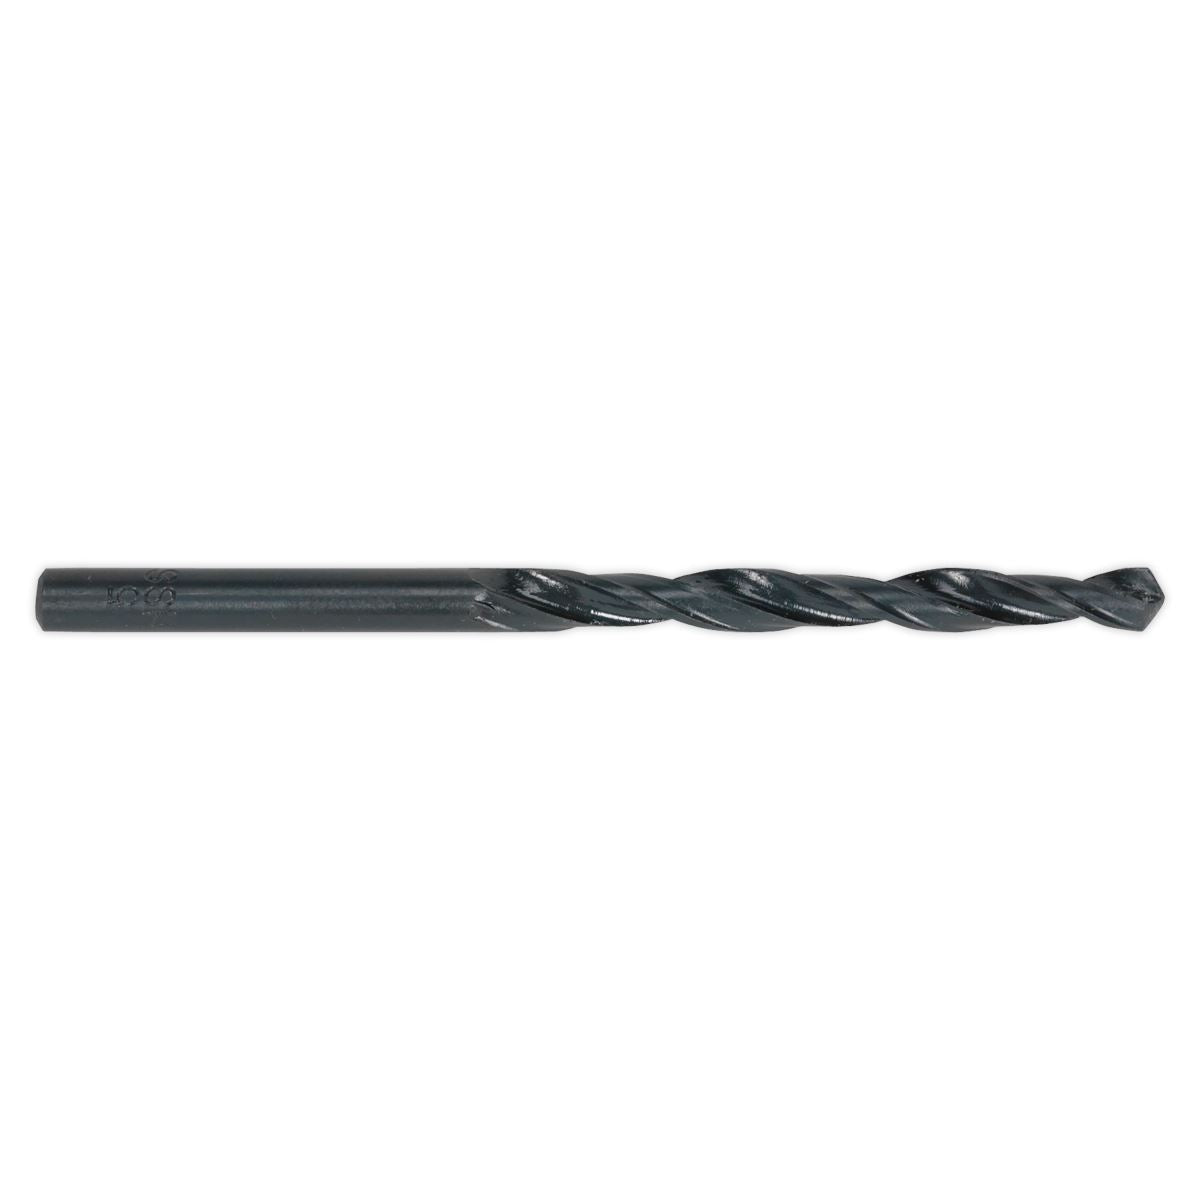 Sealey HSS Roll Forged Drill Bit Ø13mm Pack of 5